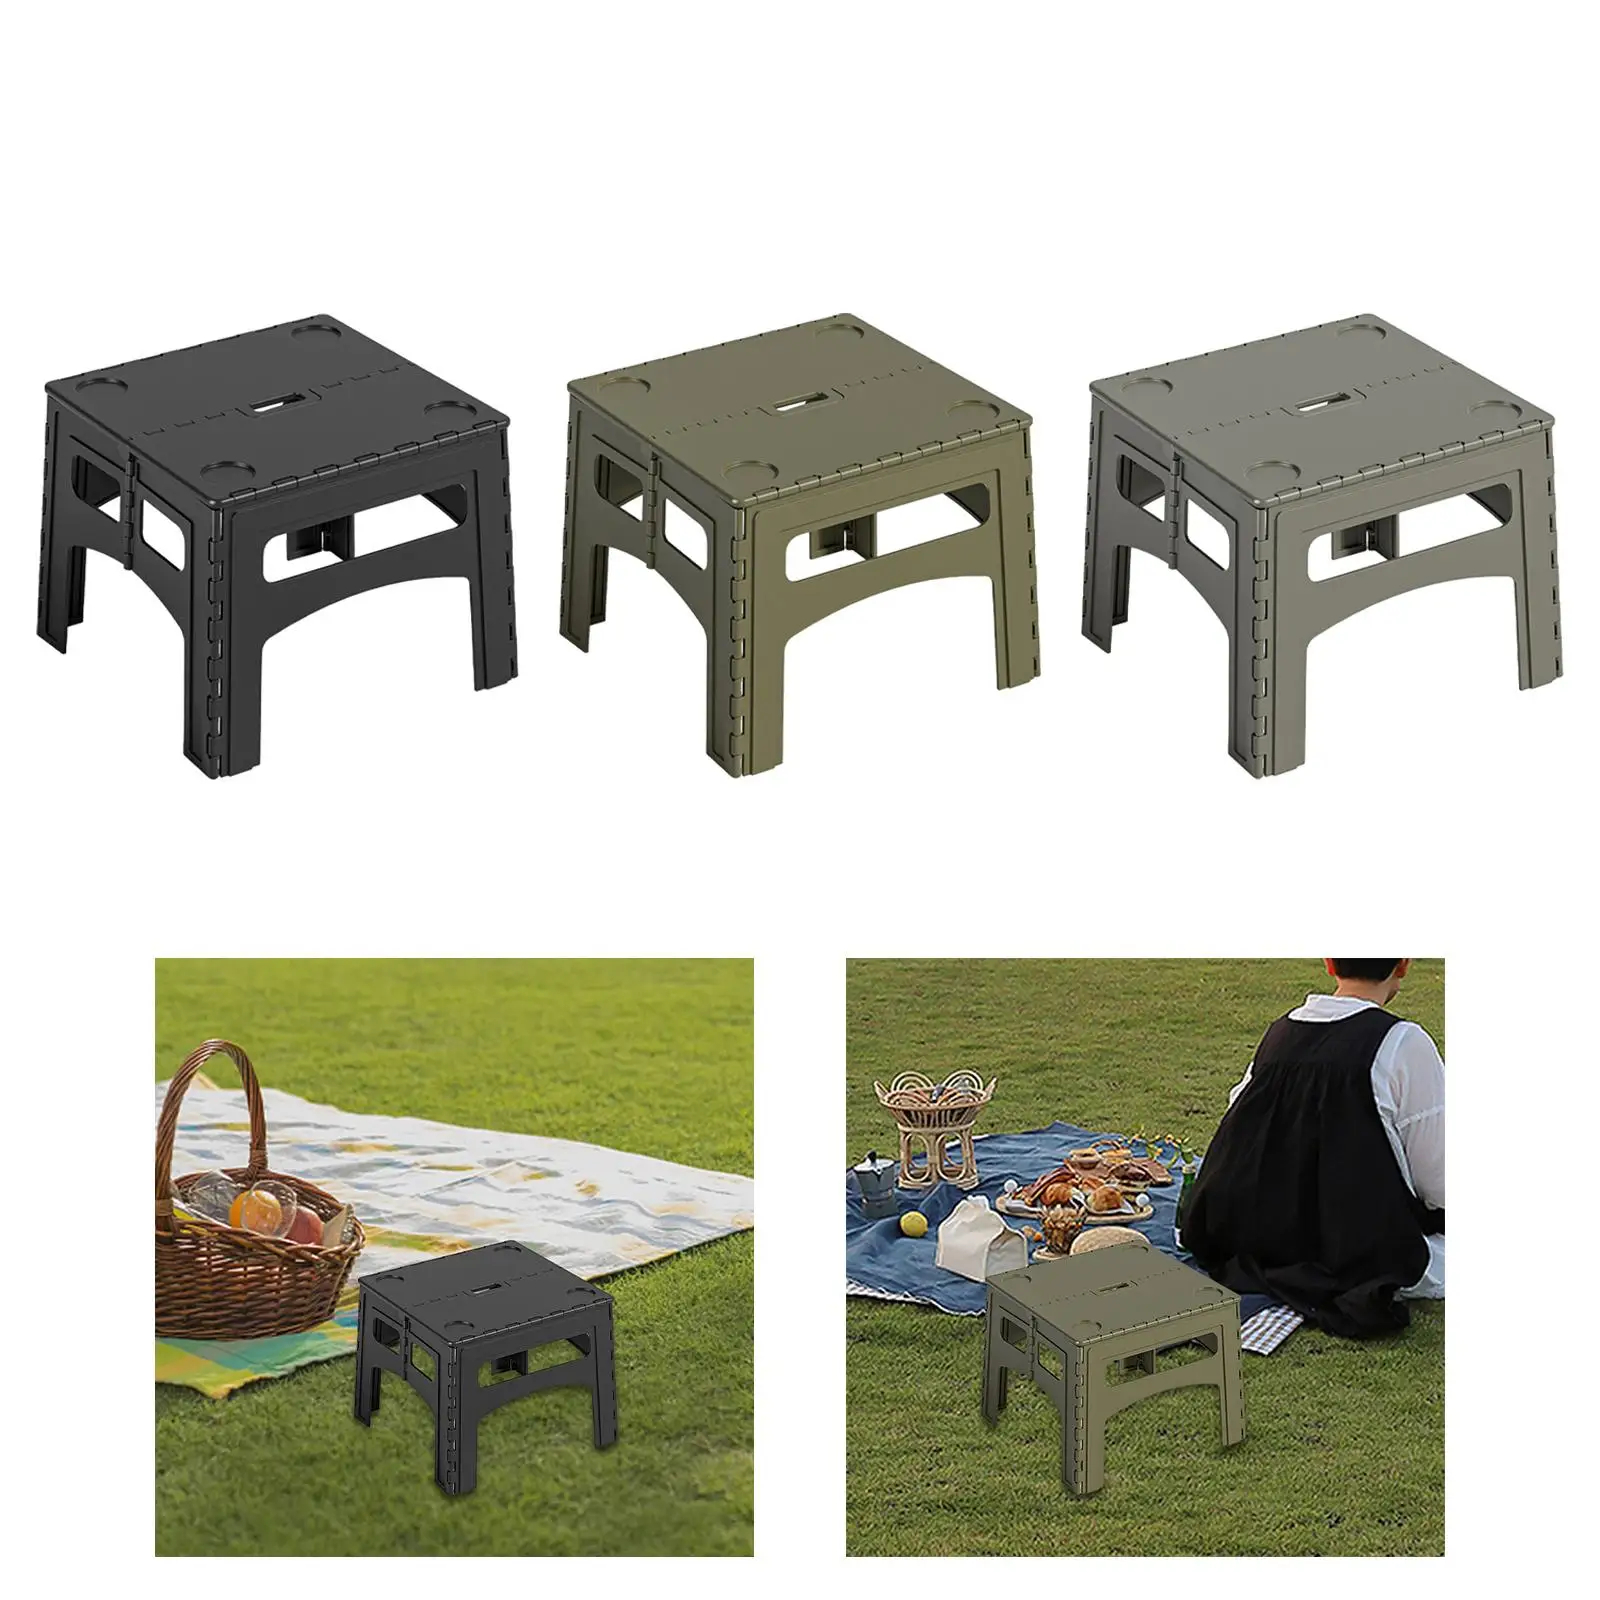 Outdoor Folding Table Foldable Picnic Table Courtyard Table Portable Camping Table for Yard, Hiking, Picnic, Beach, Climbing